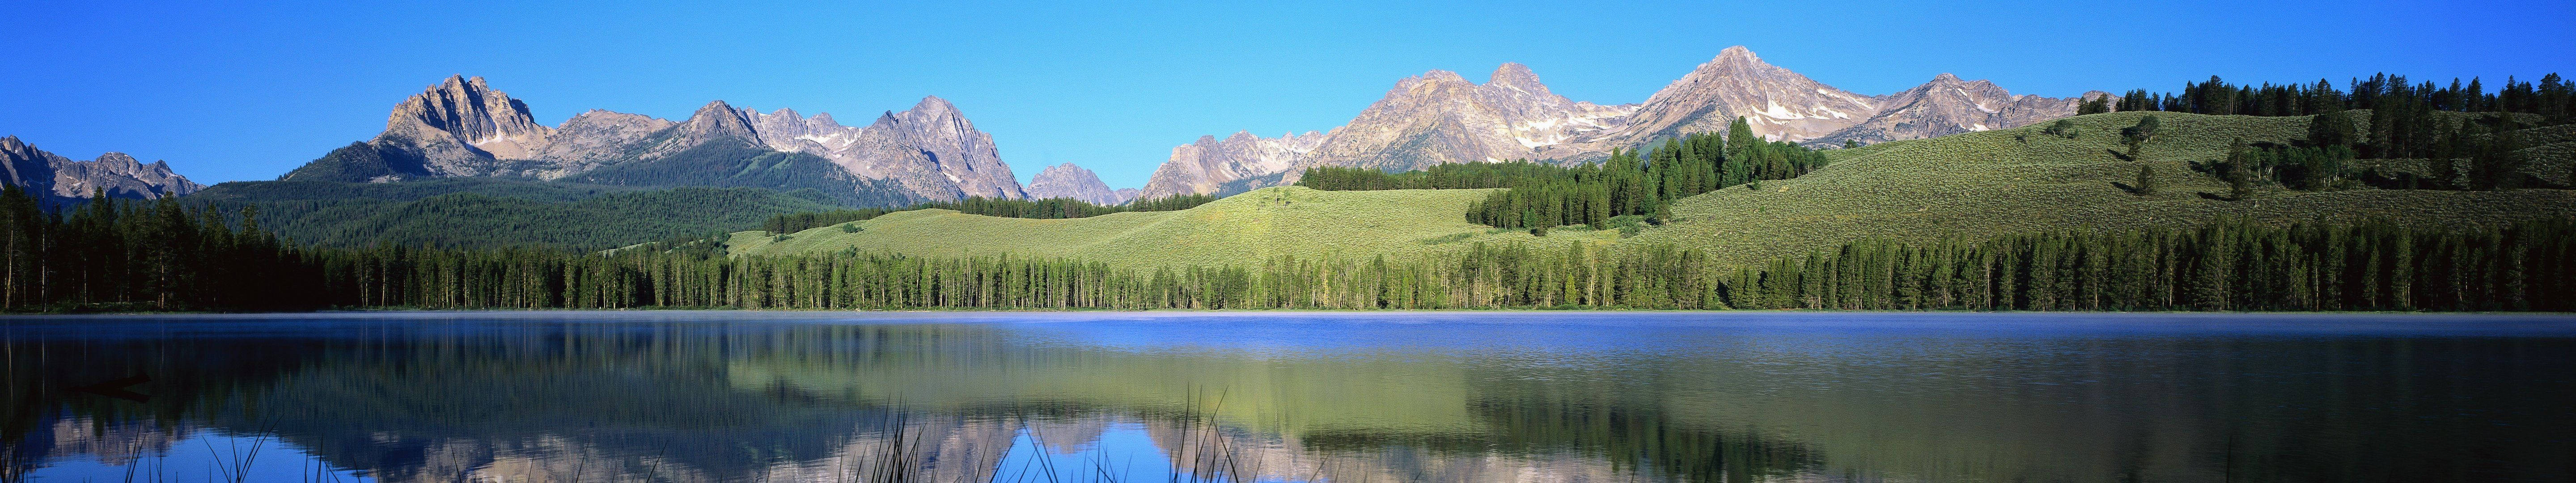 4k Dual Monitor Lake With View Of Mountains Background